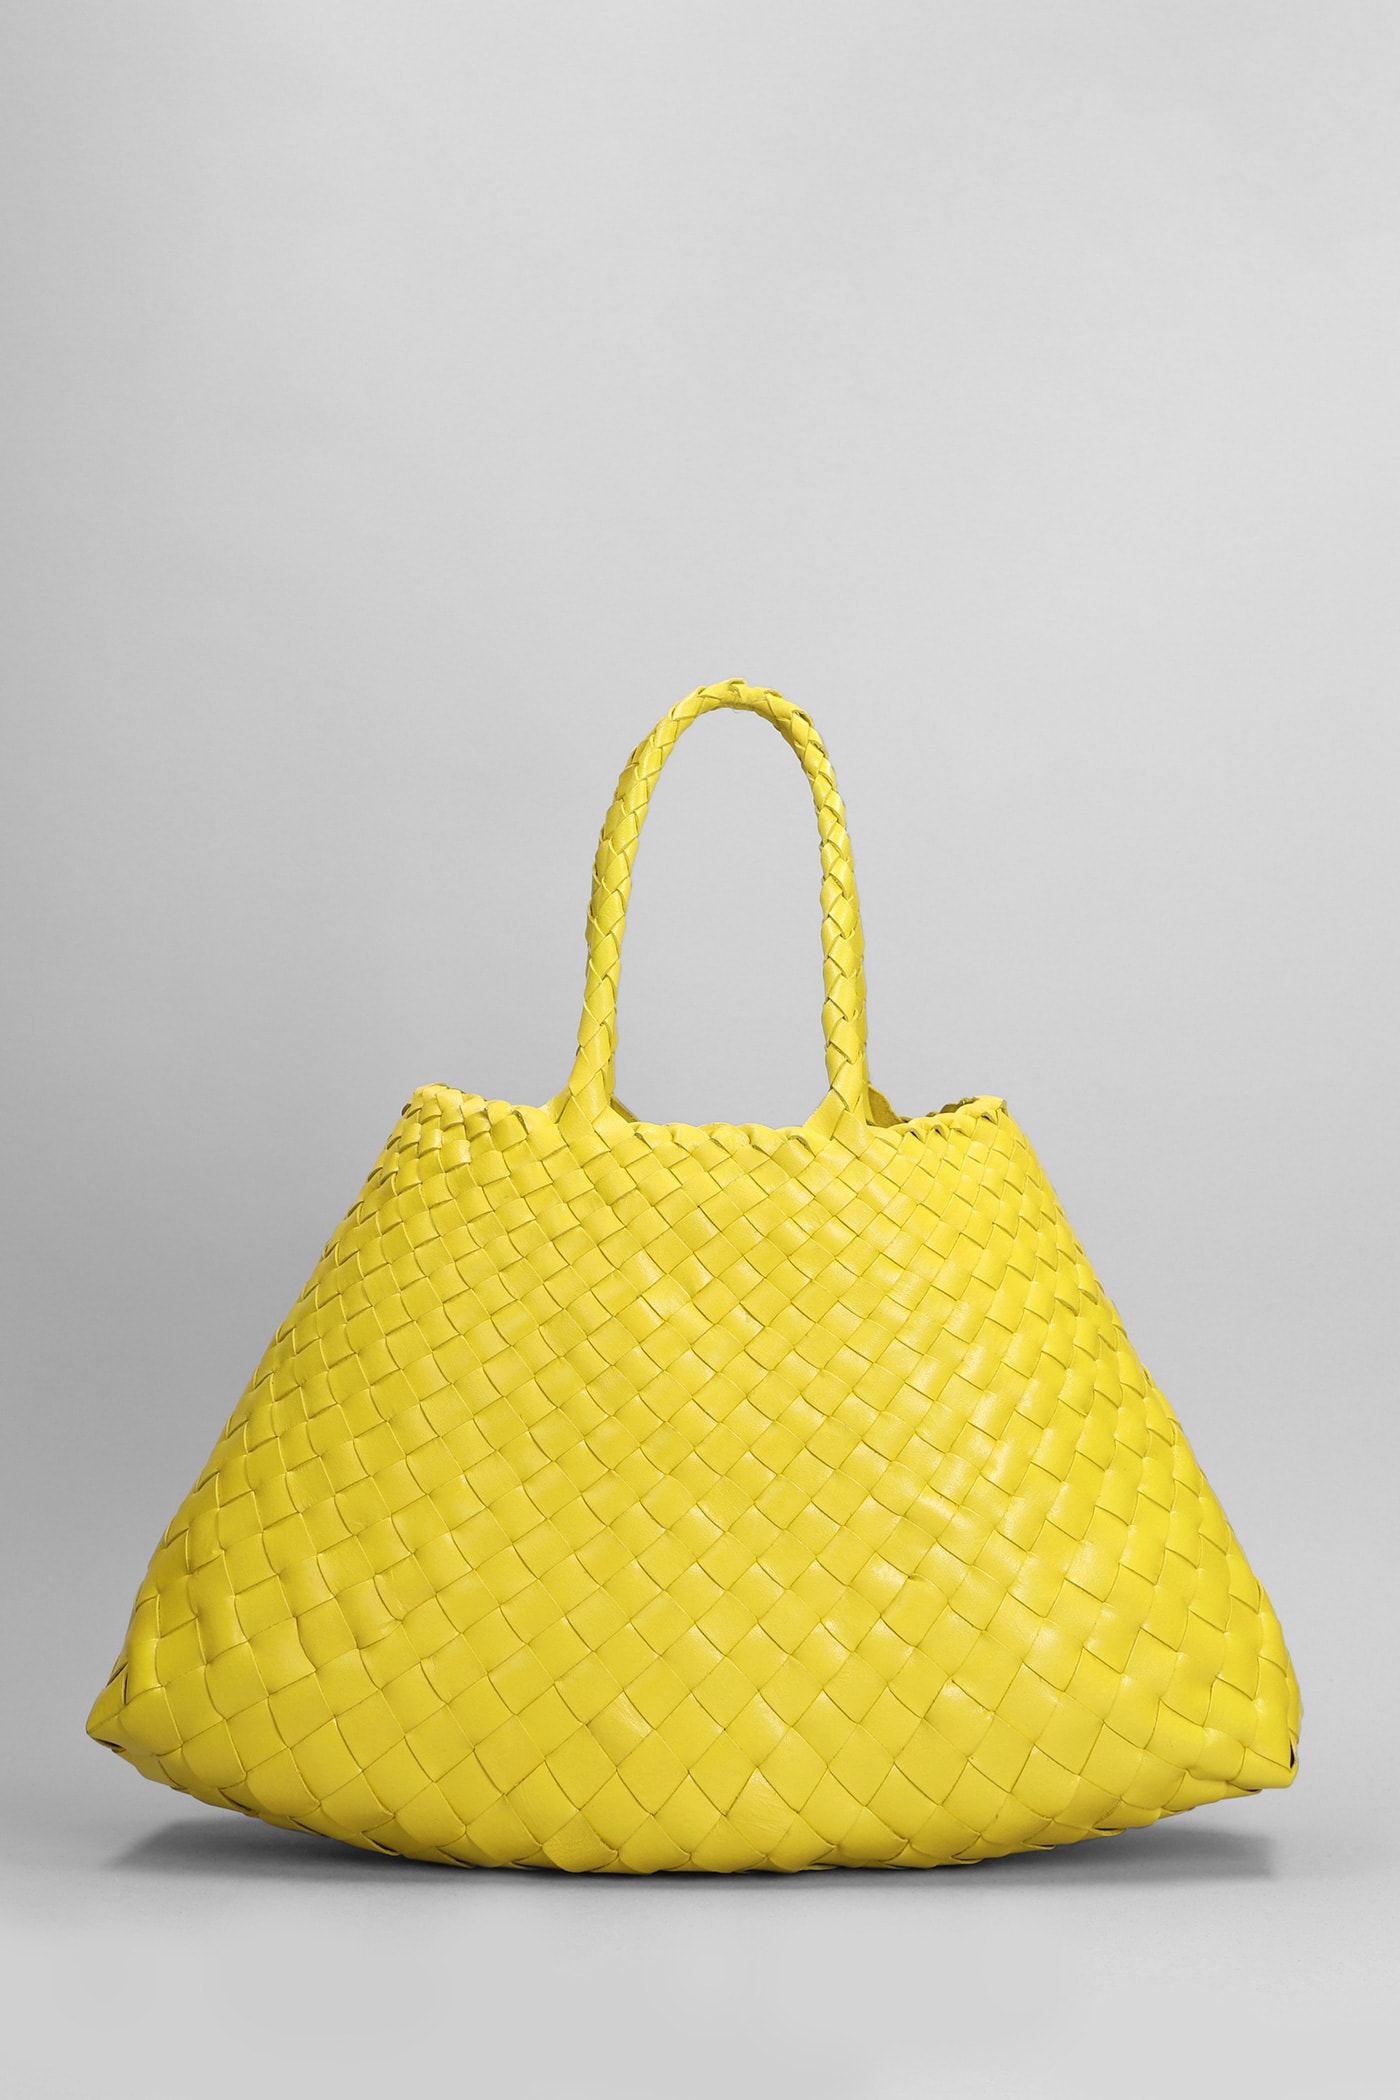 Santa Croce Small Tote In Yellow Leather